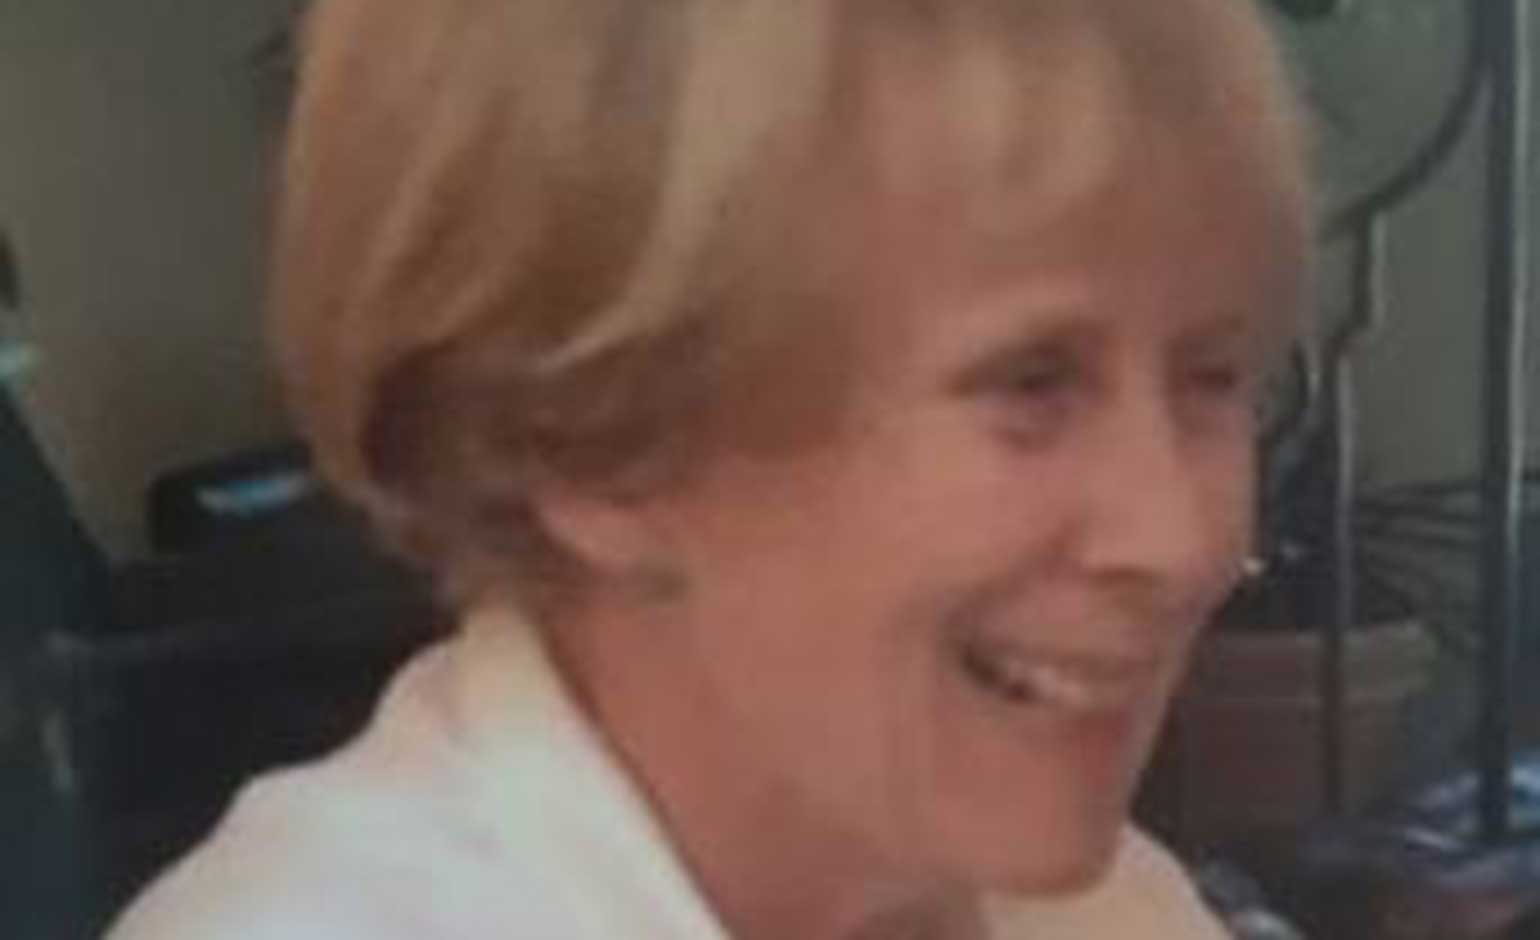 police-appeal-for-help-to-find-missing-79-year-old-woman-from-bath